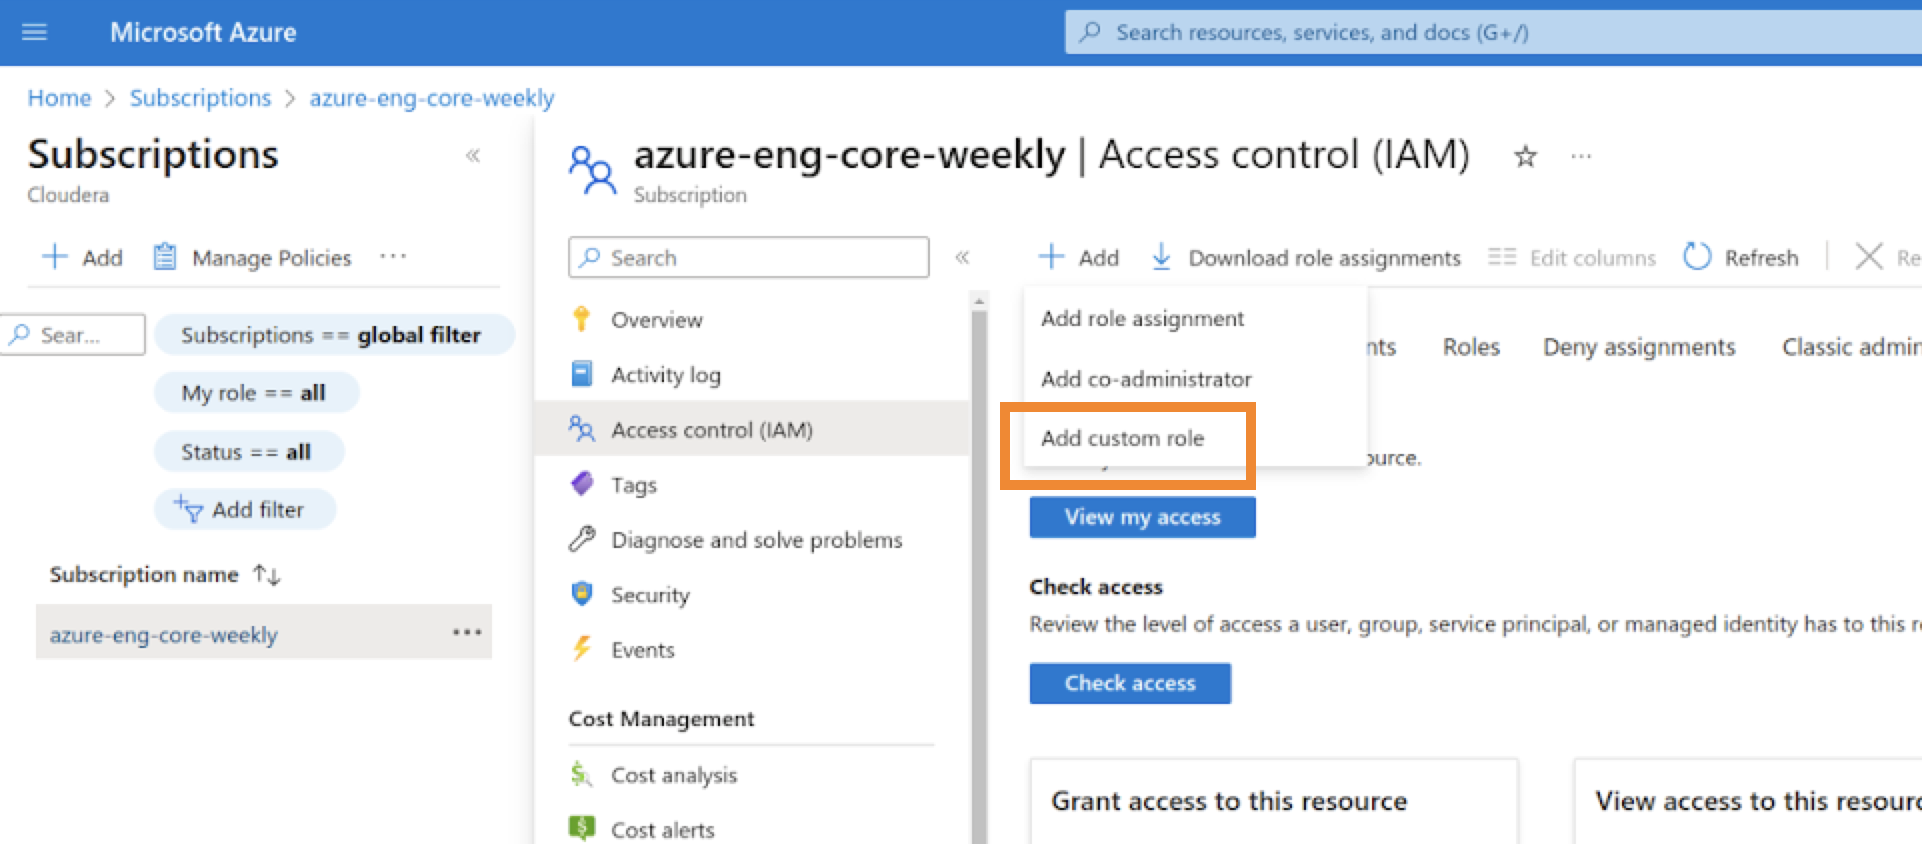 The sample image shows the Access control (IAM) page in Microsoft Azure to create a custom role.